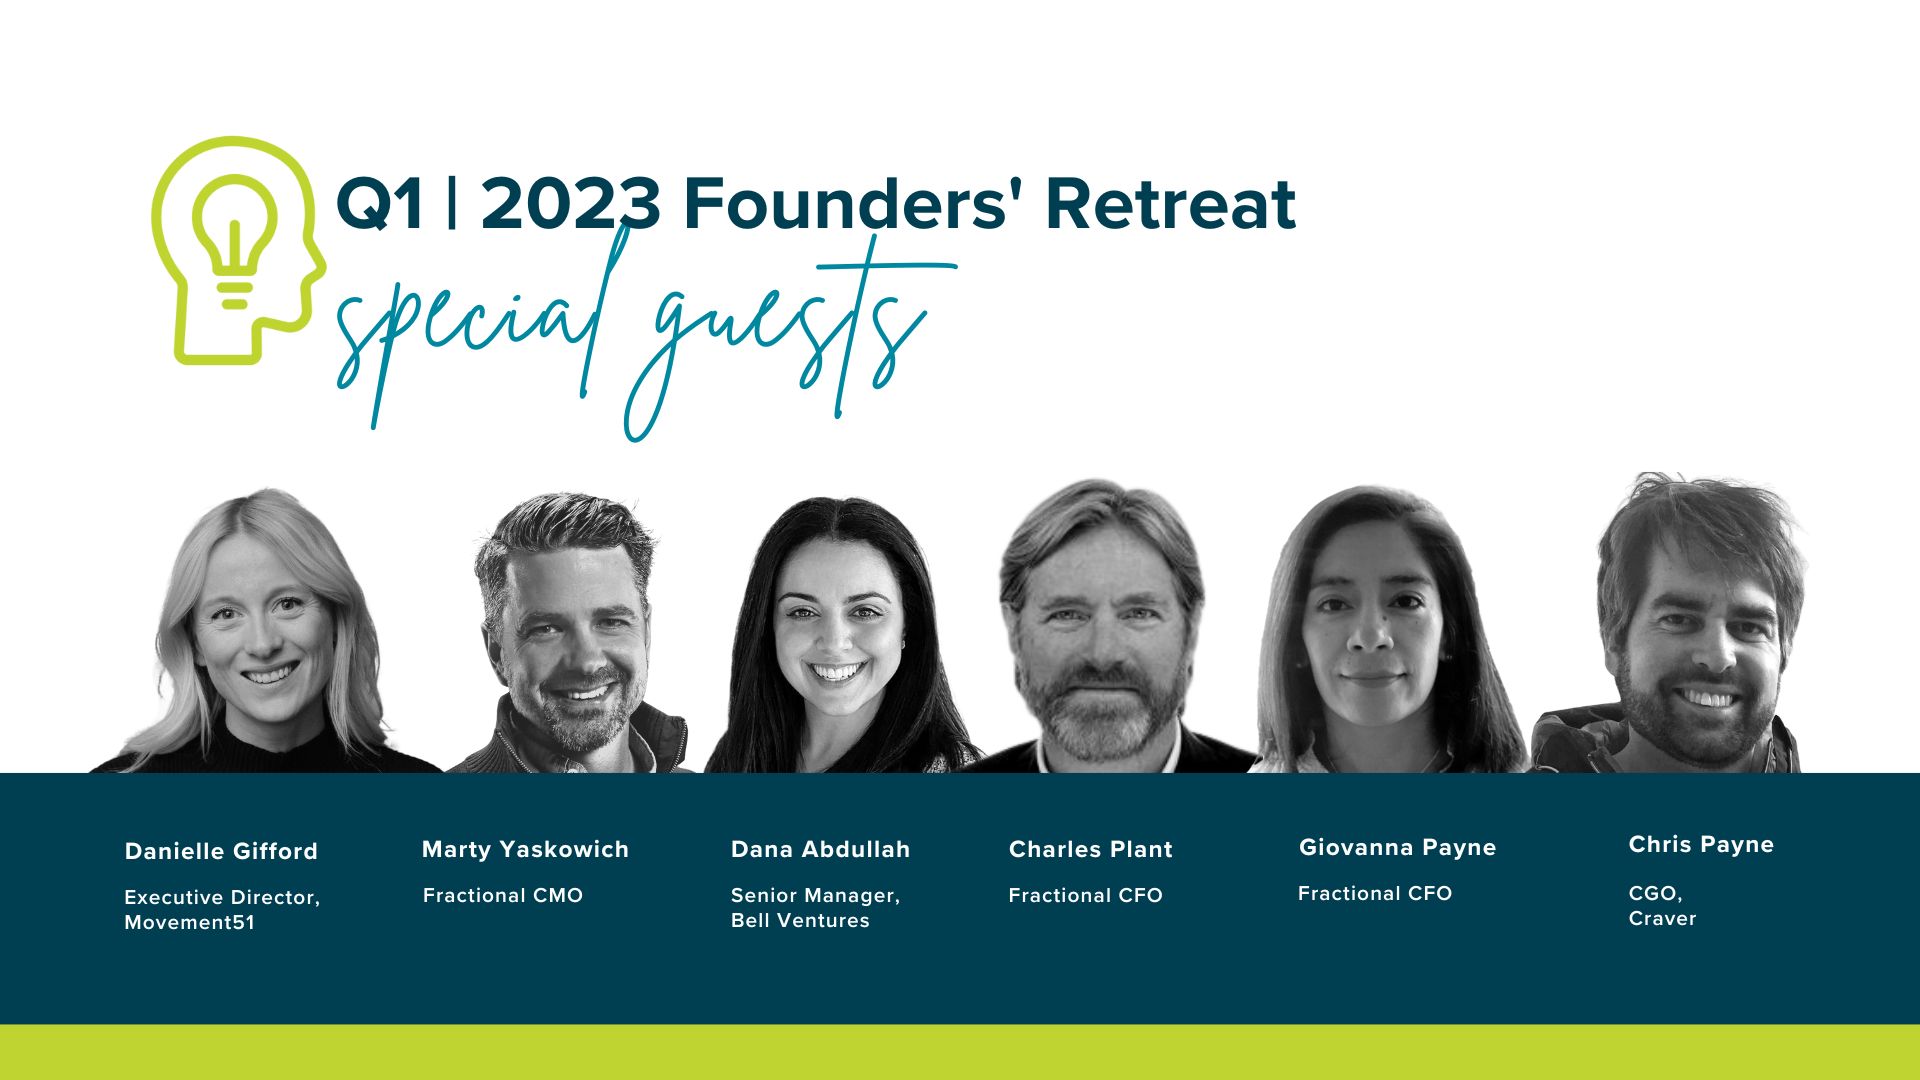 Founder's Retreat Graphic image showcasing 6 of the experts who joined Cultivator for the 2023 Founders' Retreat. 